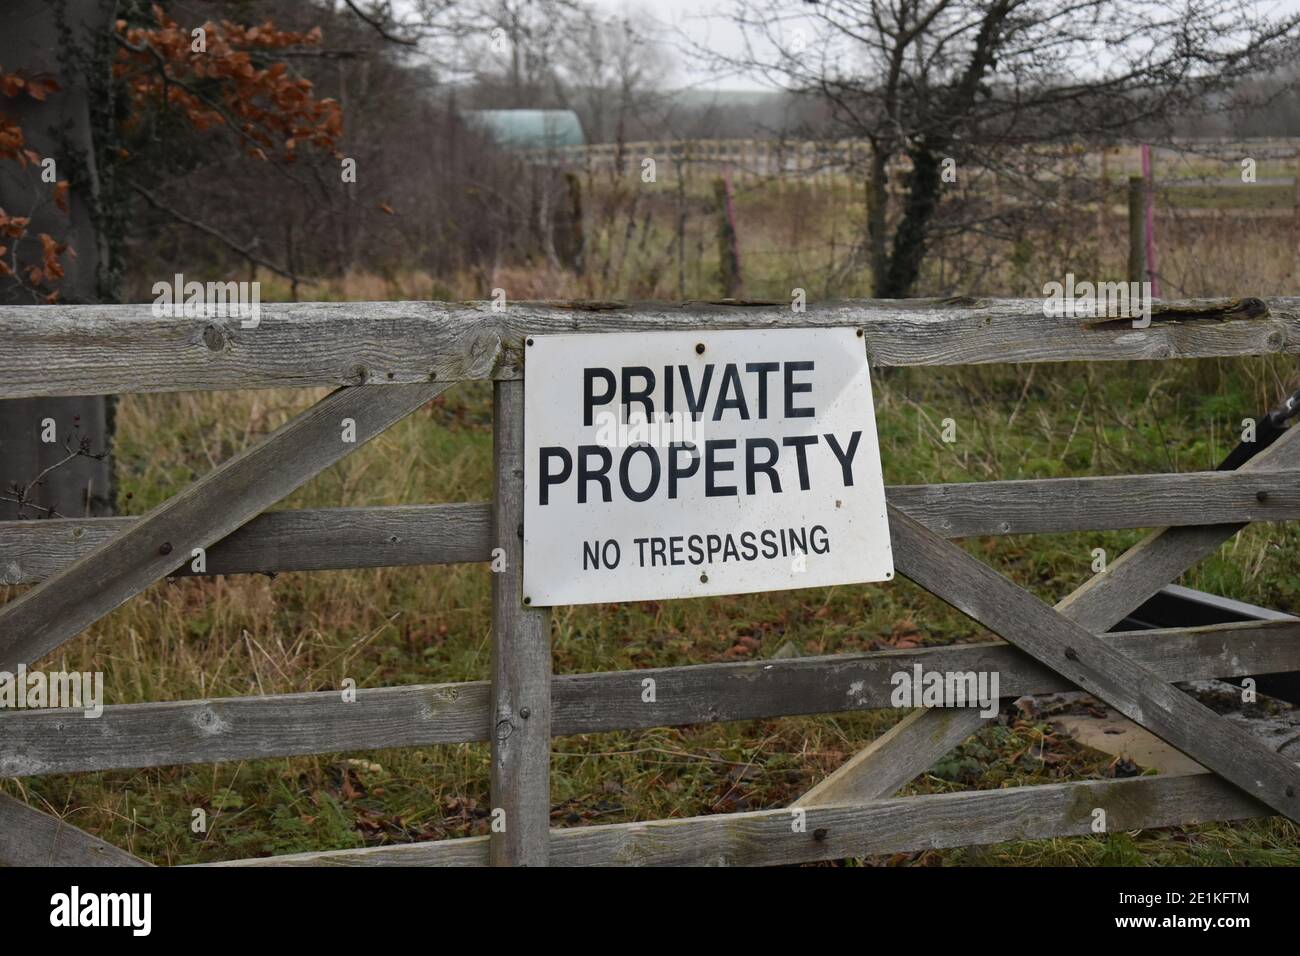 Sign on gate: Private Property No Trespassing. Stock Photo